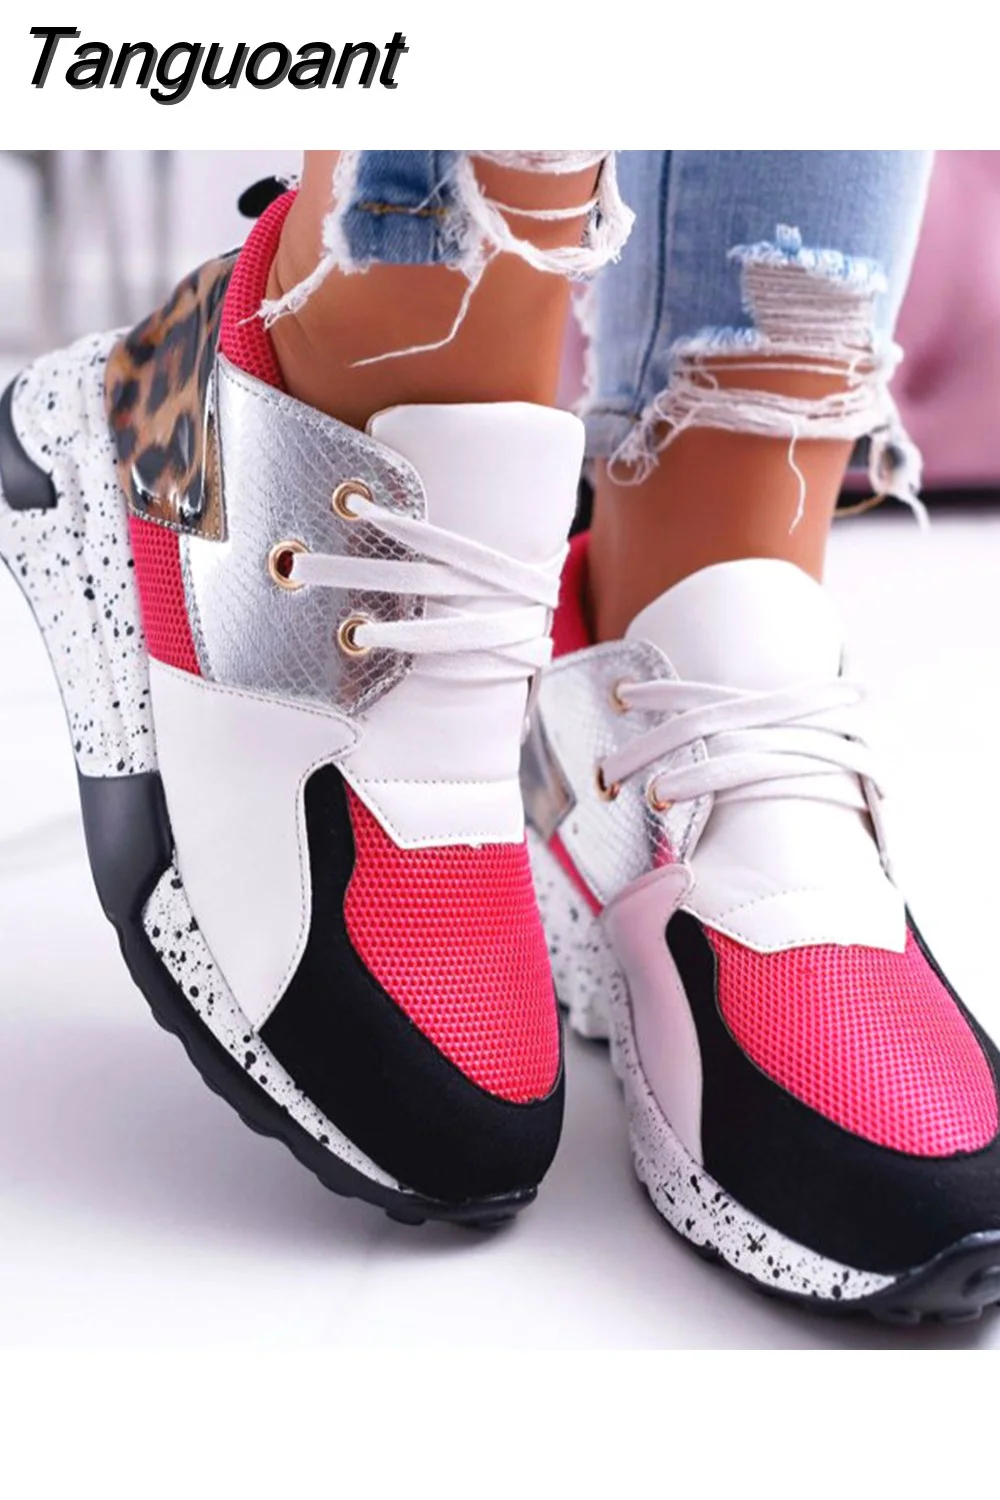 Tanguoant Women Autumn Wedges Lace-Up Printed Sneakers Patchwork Thick Bottom Sports Running Shoes Casual Ladies Vulcanized Footwear